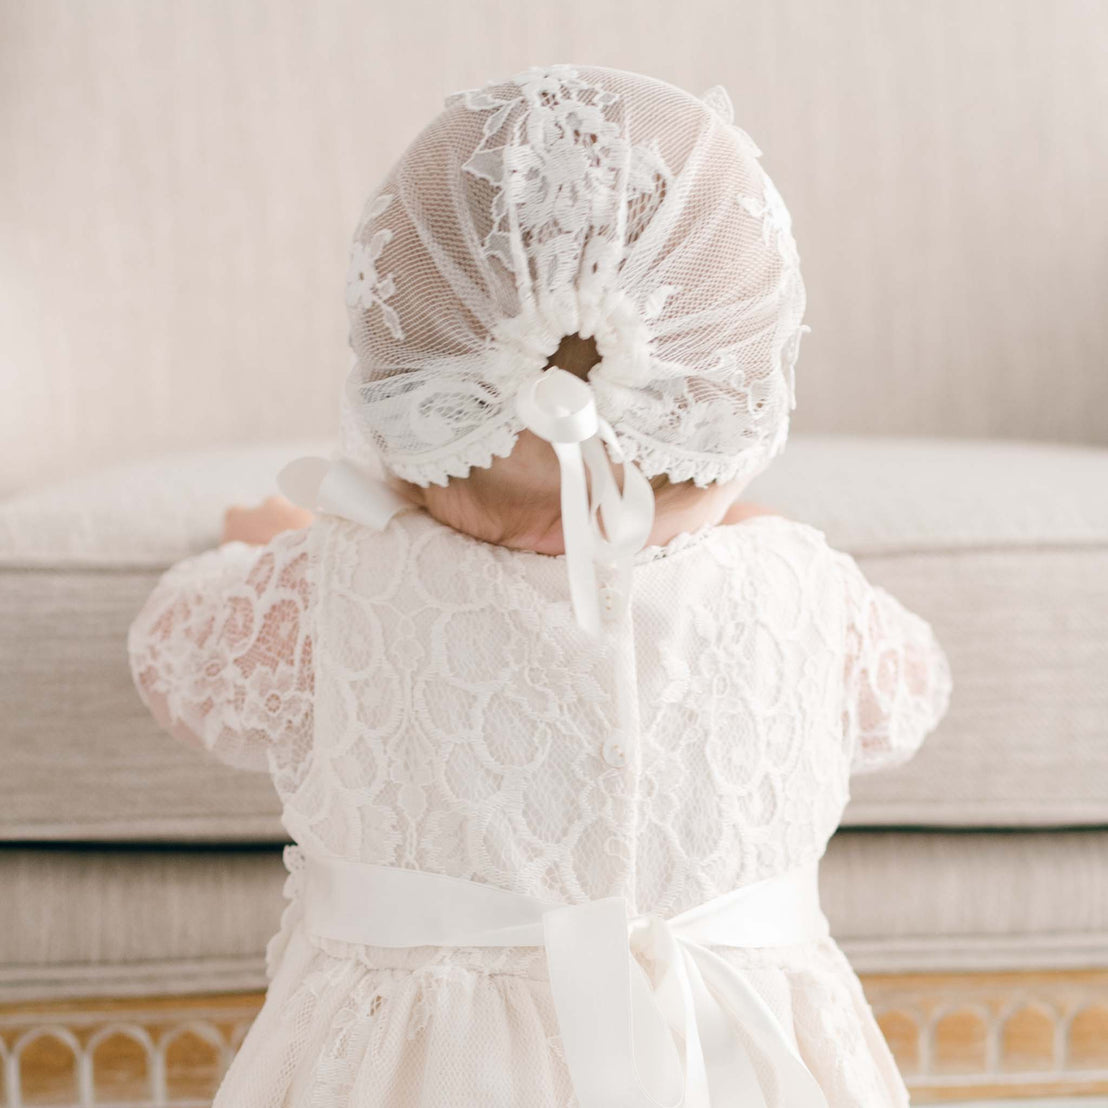 A baby dressed in a Juliette Christening Gown & Bonnet, standing with their back to the camera. The setting is indoors with a soft, neutral background.